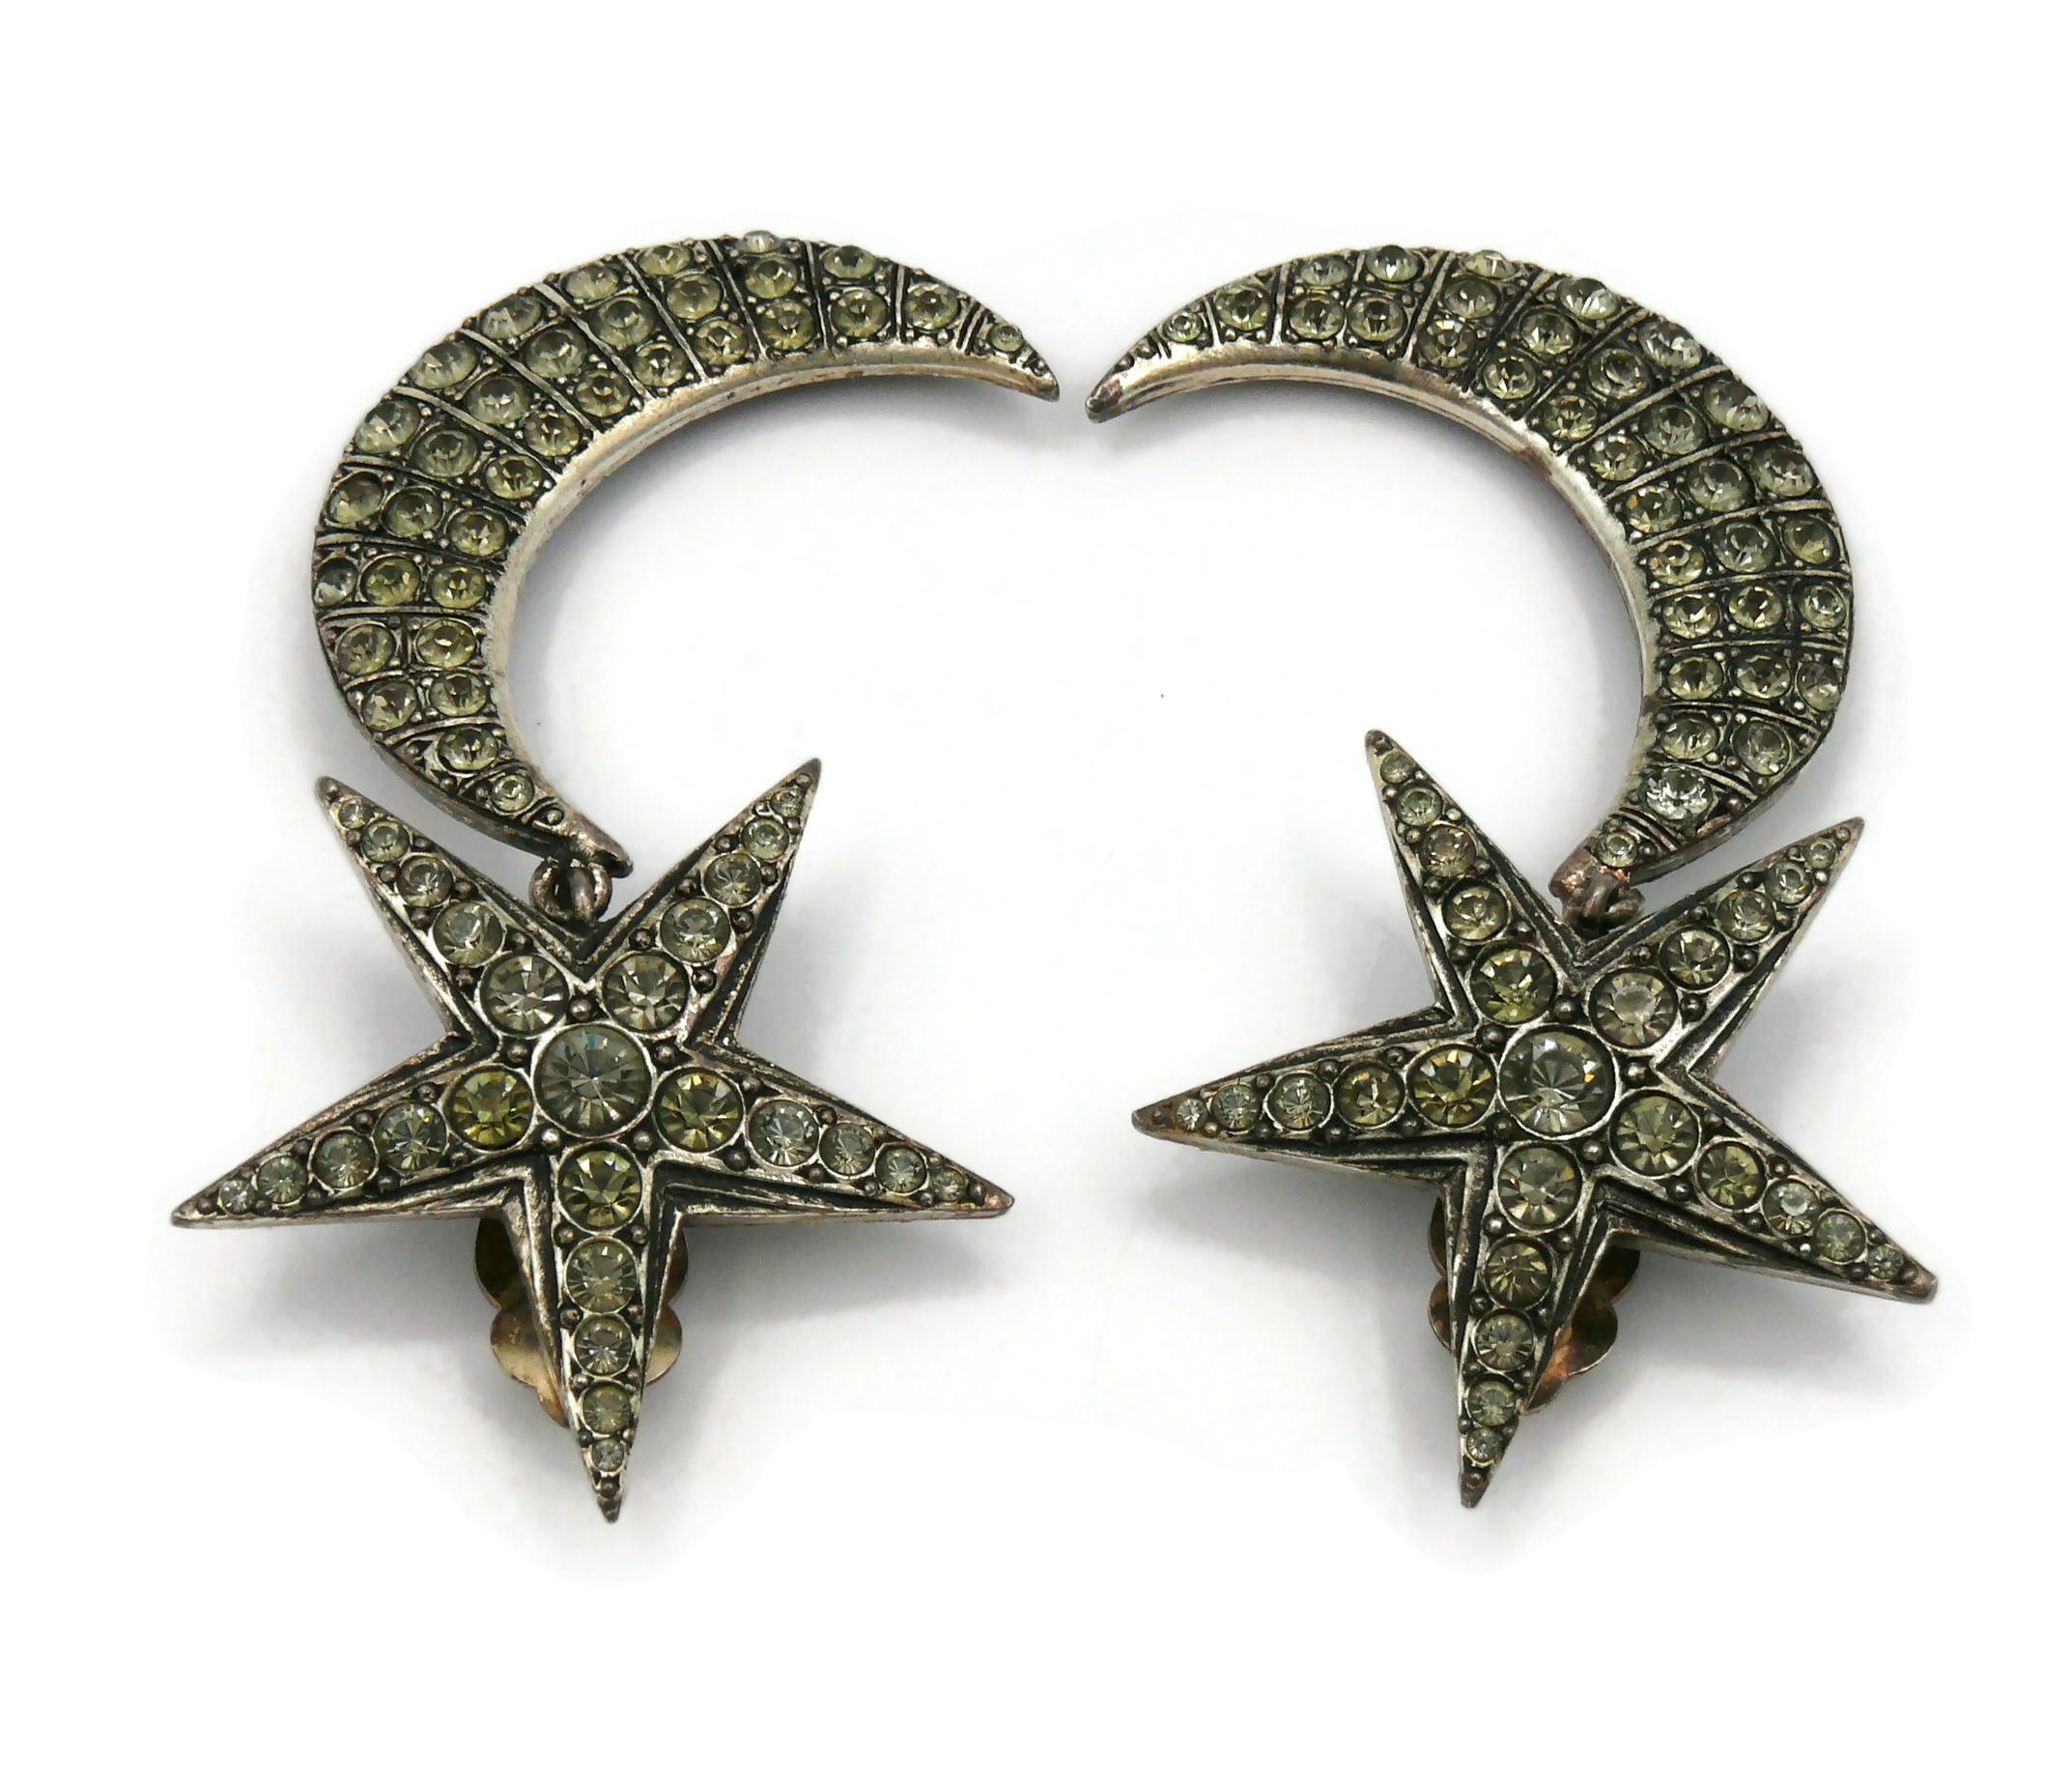 JEAN PAUL GAULTIER Vintage Jewelled Star and Crescent Moon Dangling Earrings In Good Condition For Sale In Nice, FR